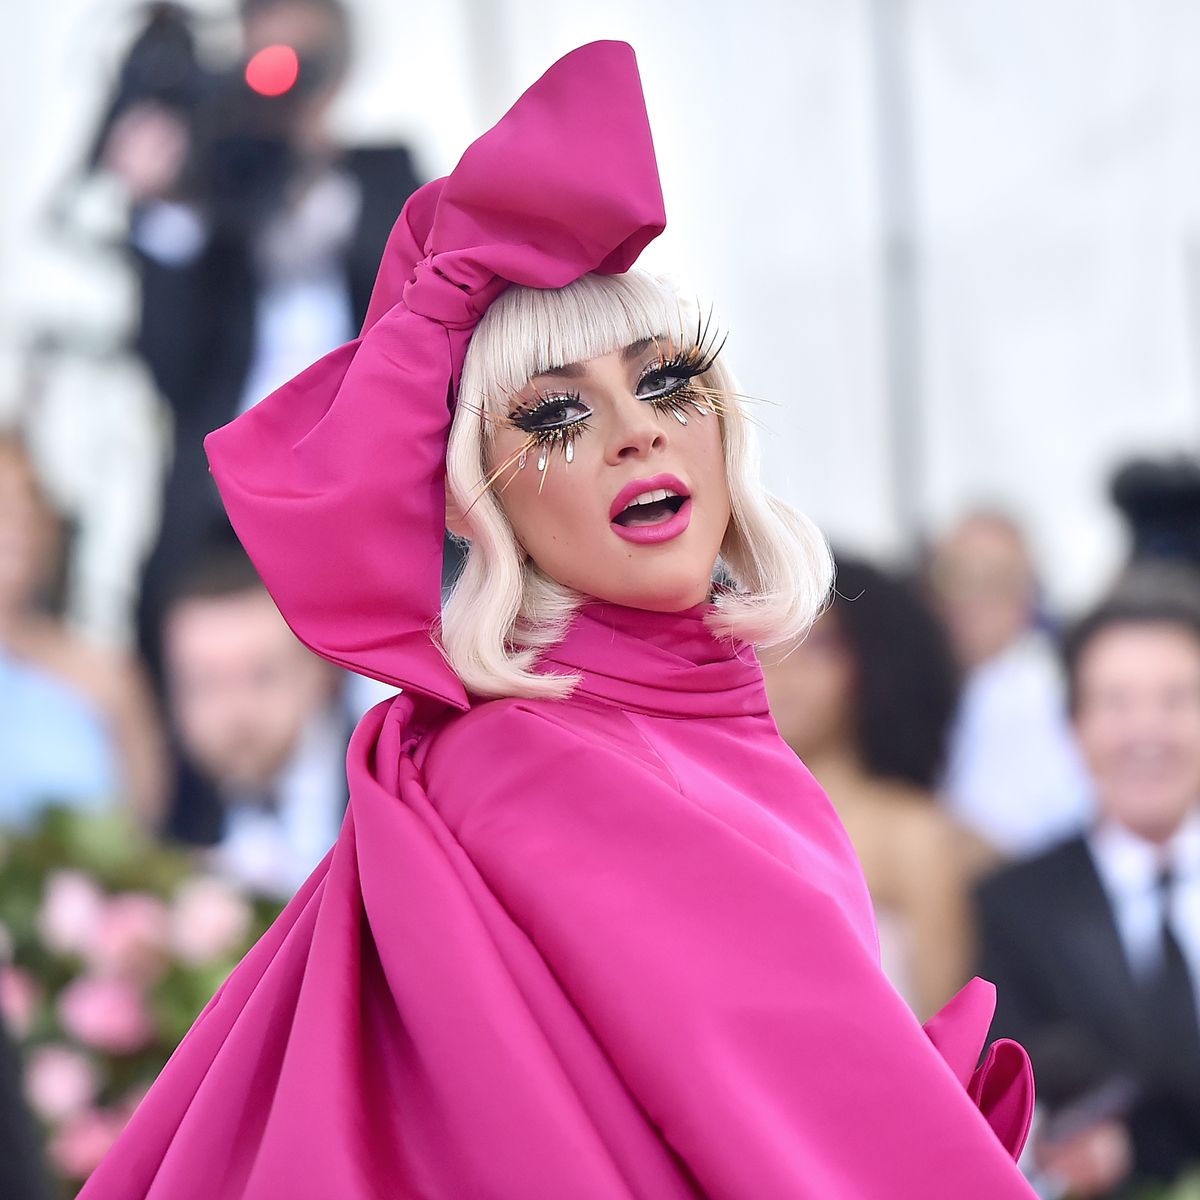 Lady Gaga in Brandon Maxwell at the 2019 MET Gala Camp: Notes on Fashion